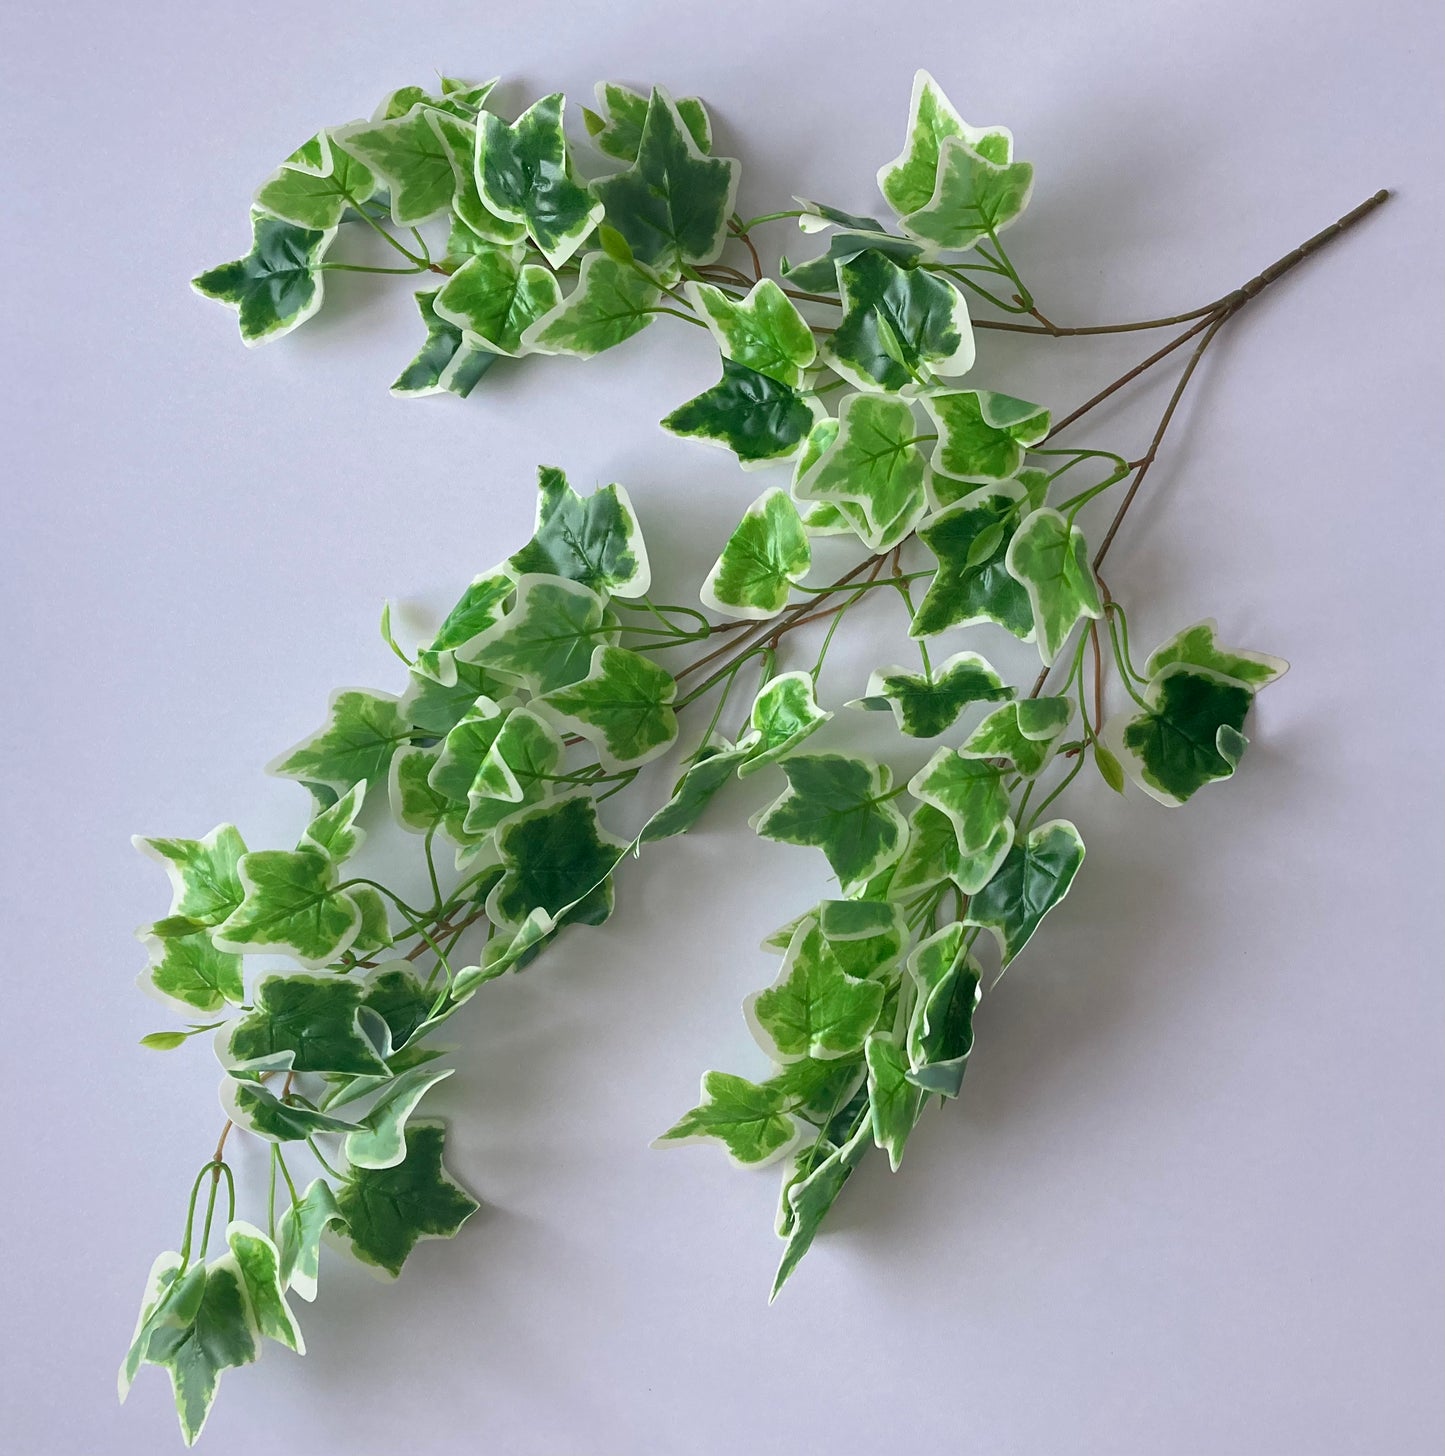 Variegated Ivy Trailing